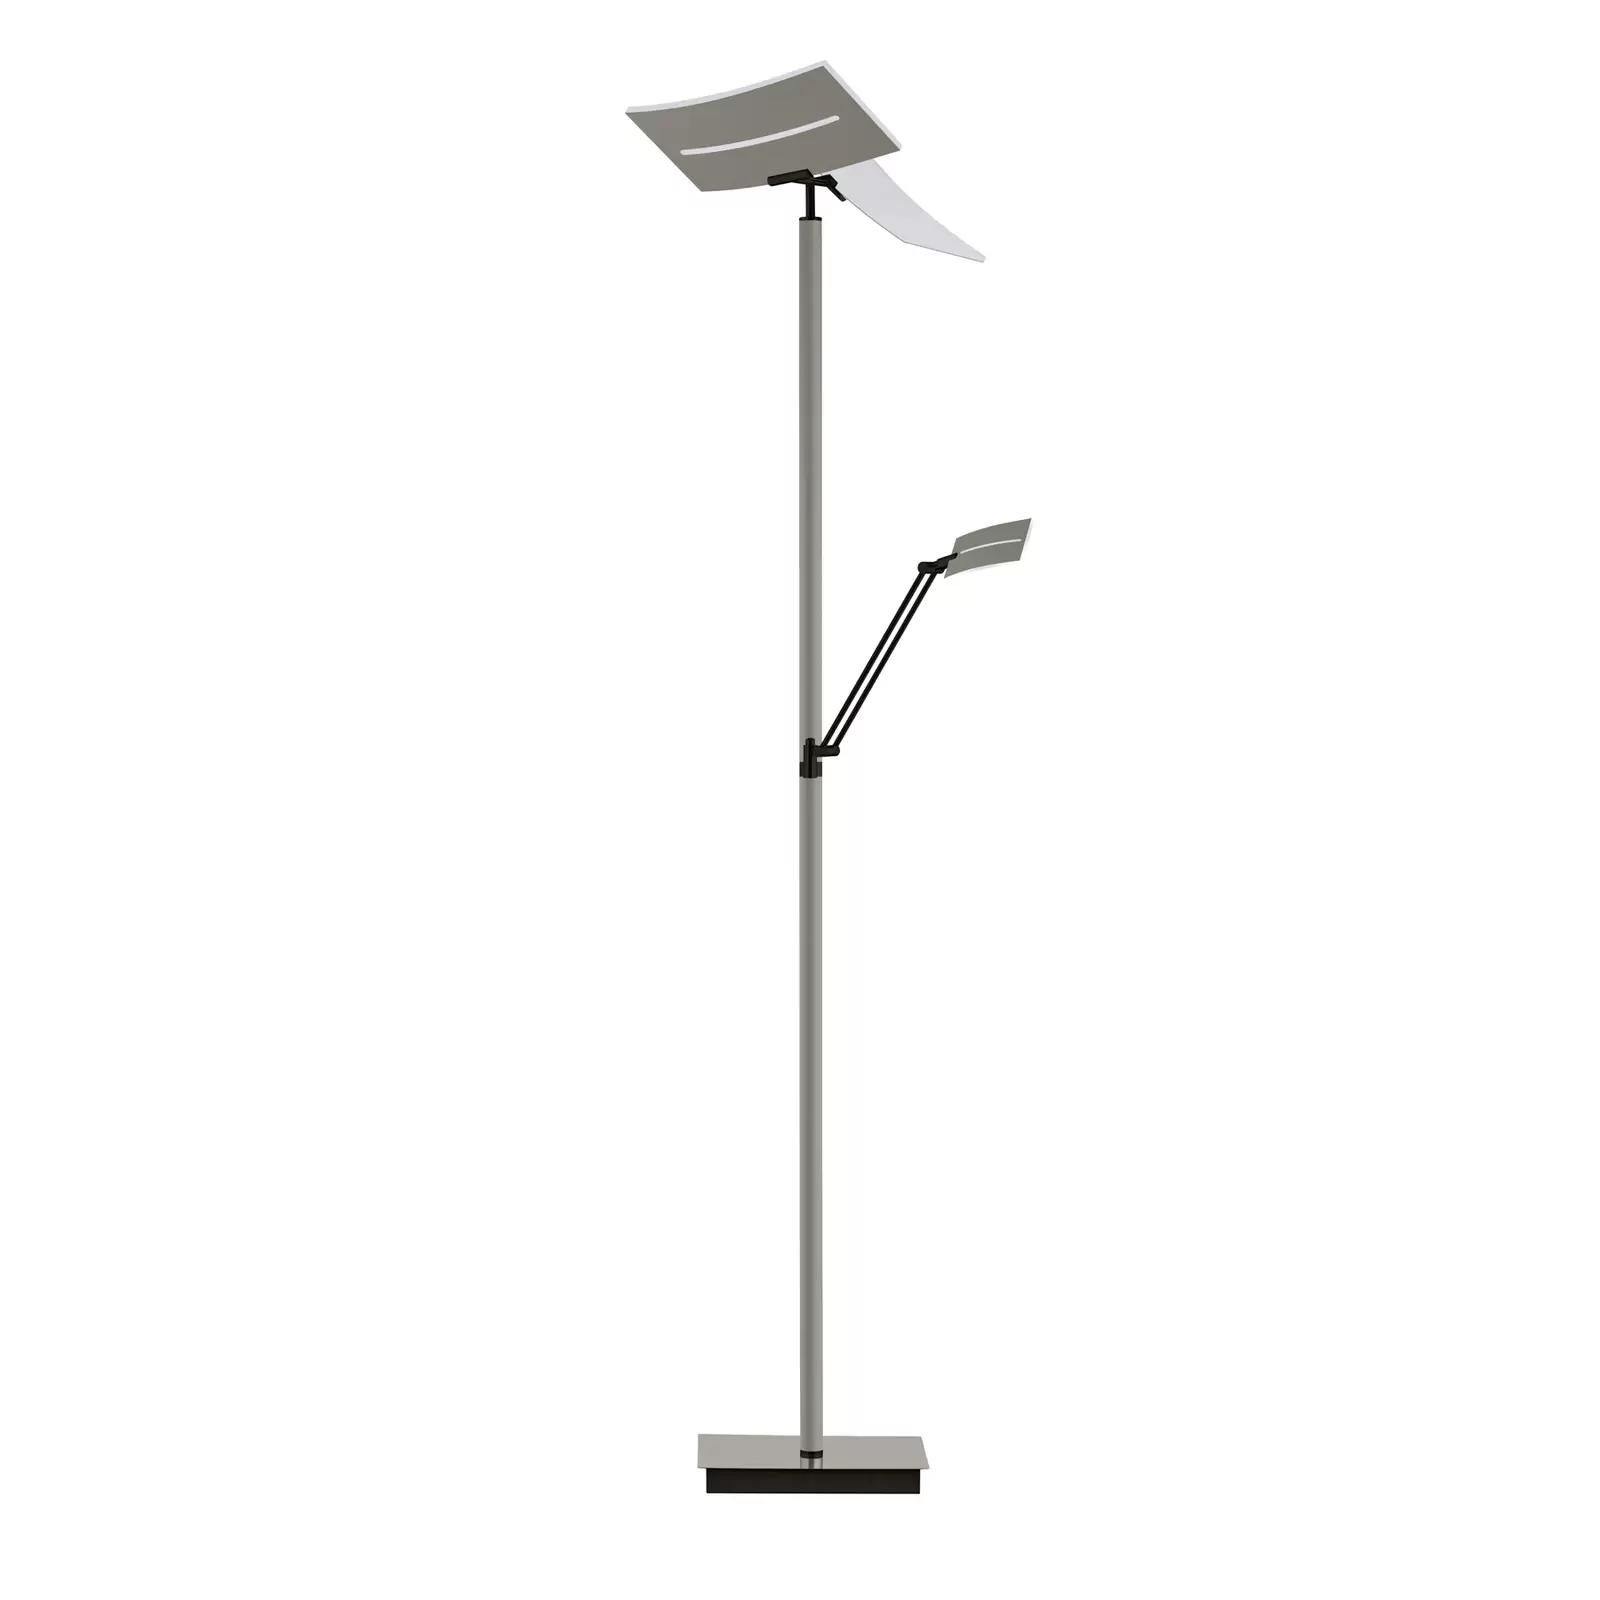 LED-Stehlampe Evolo CCT mit Leselicht, taupe